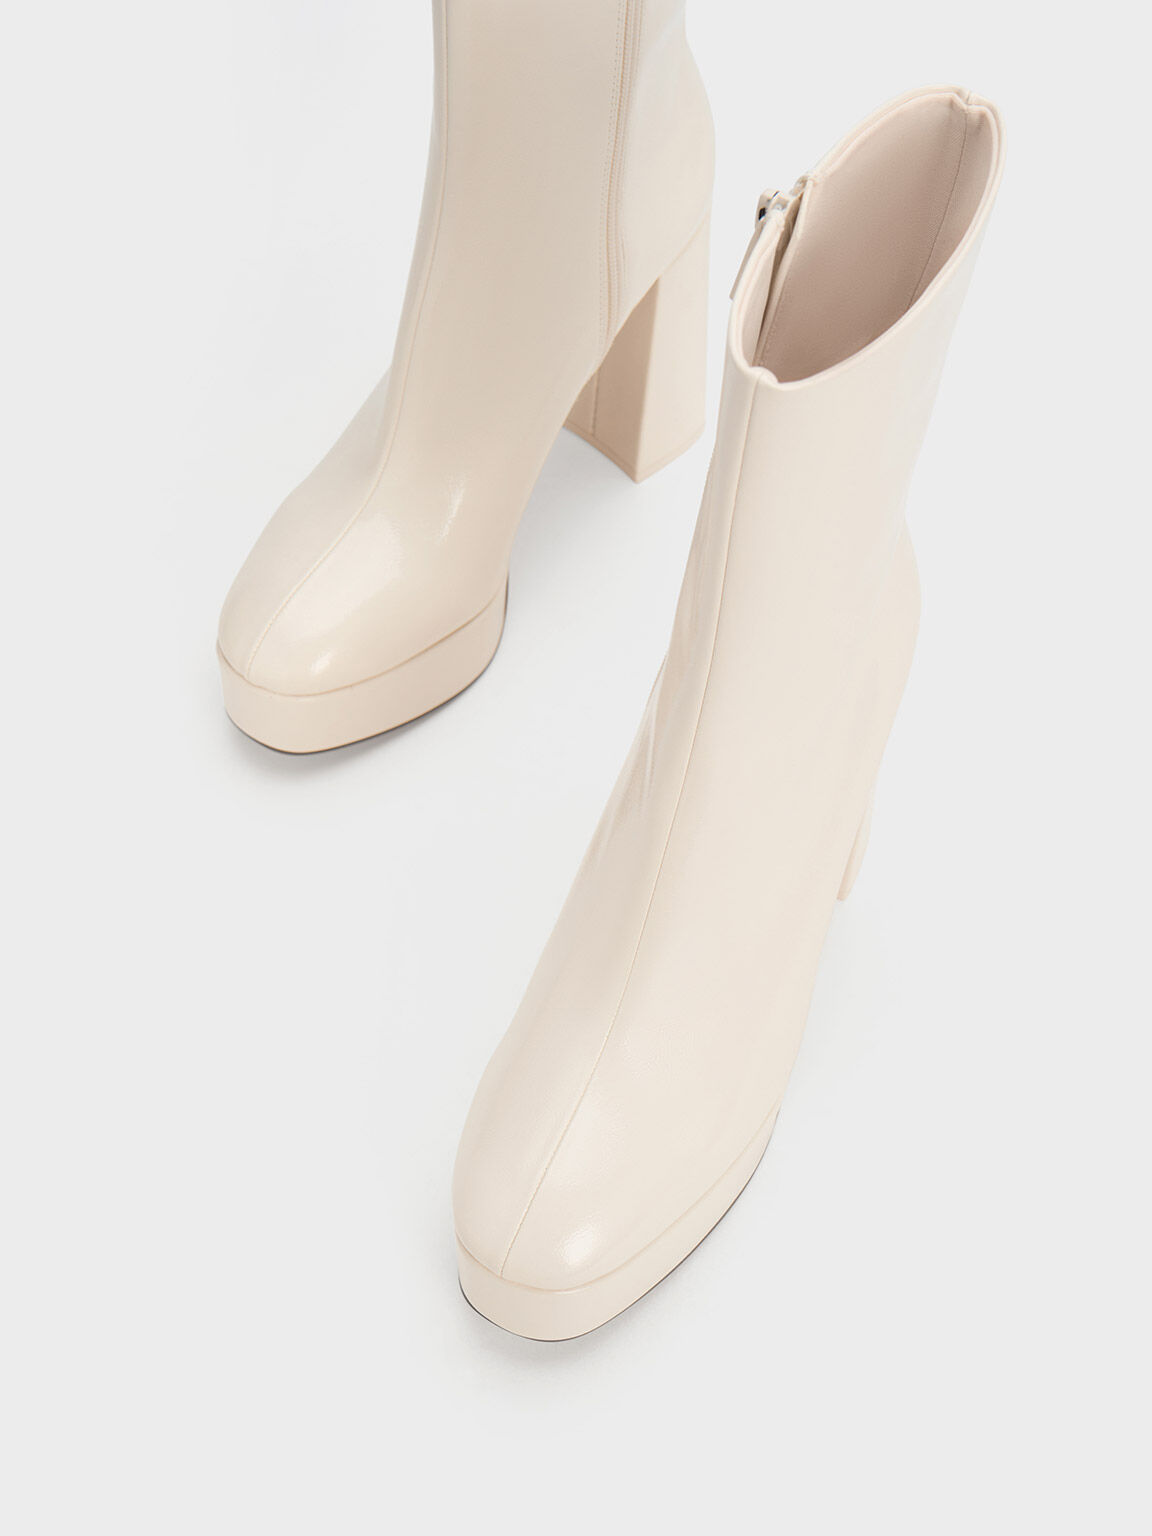 ANGIE WHITE STUDS - THE GLOVE BOOTS LAURENCE DACADE – Laurence Dacade Paris